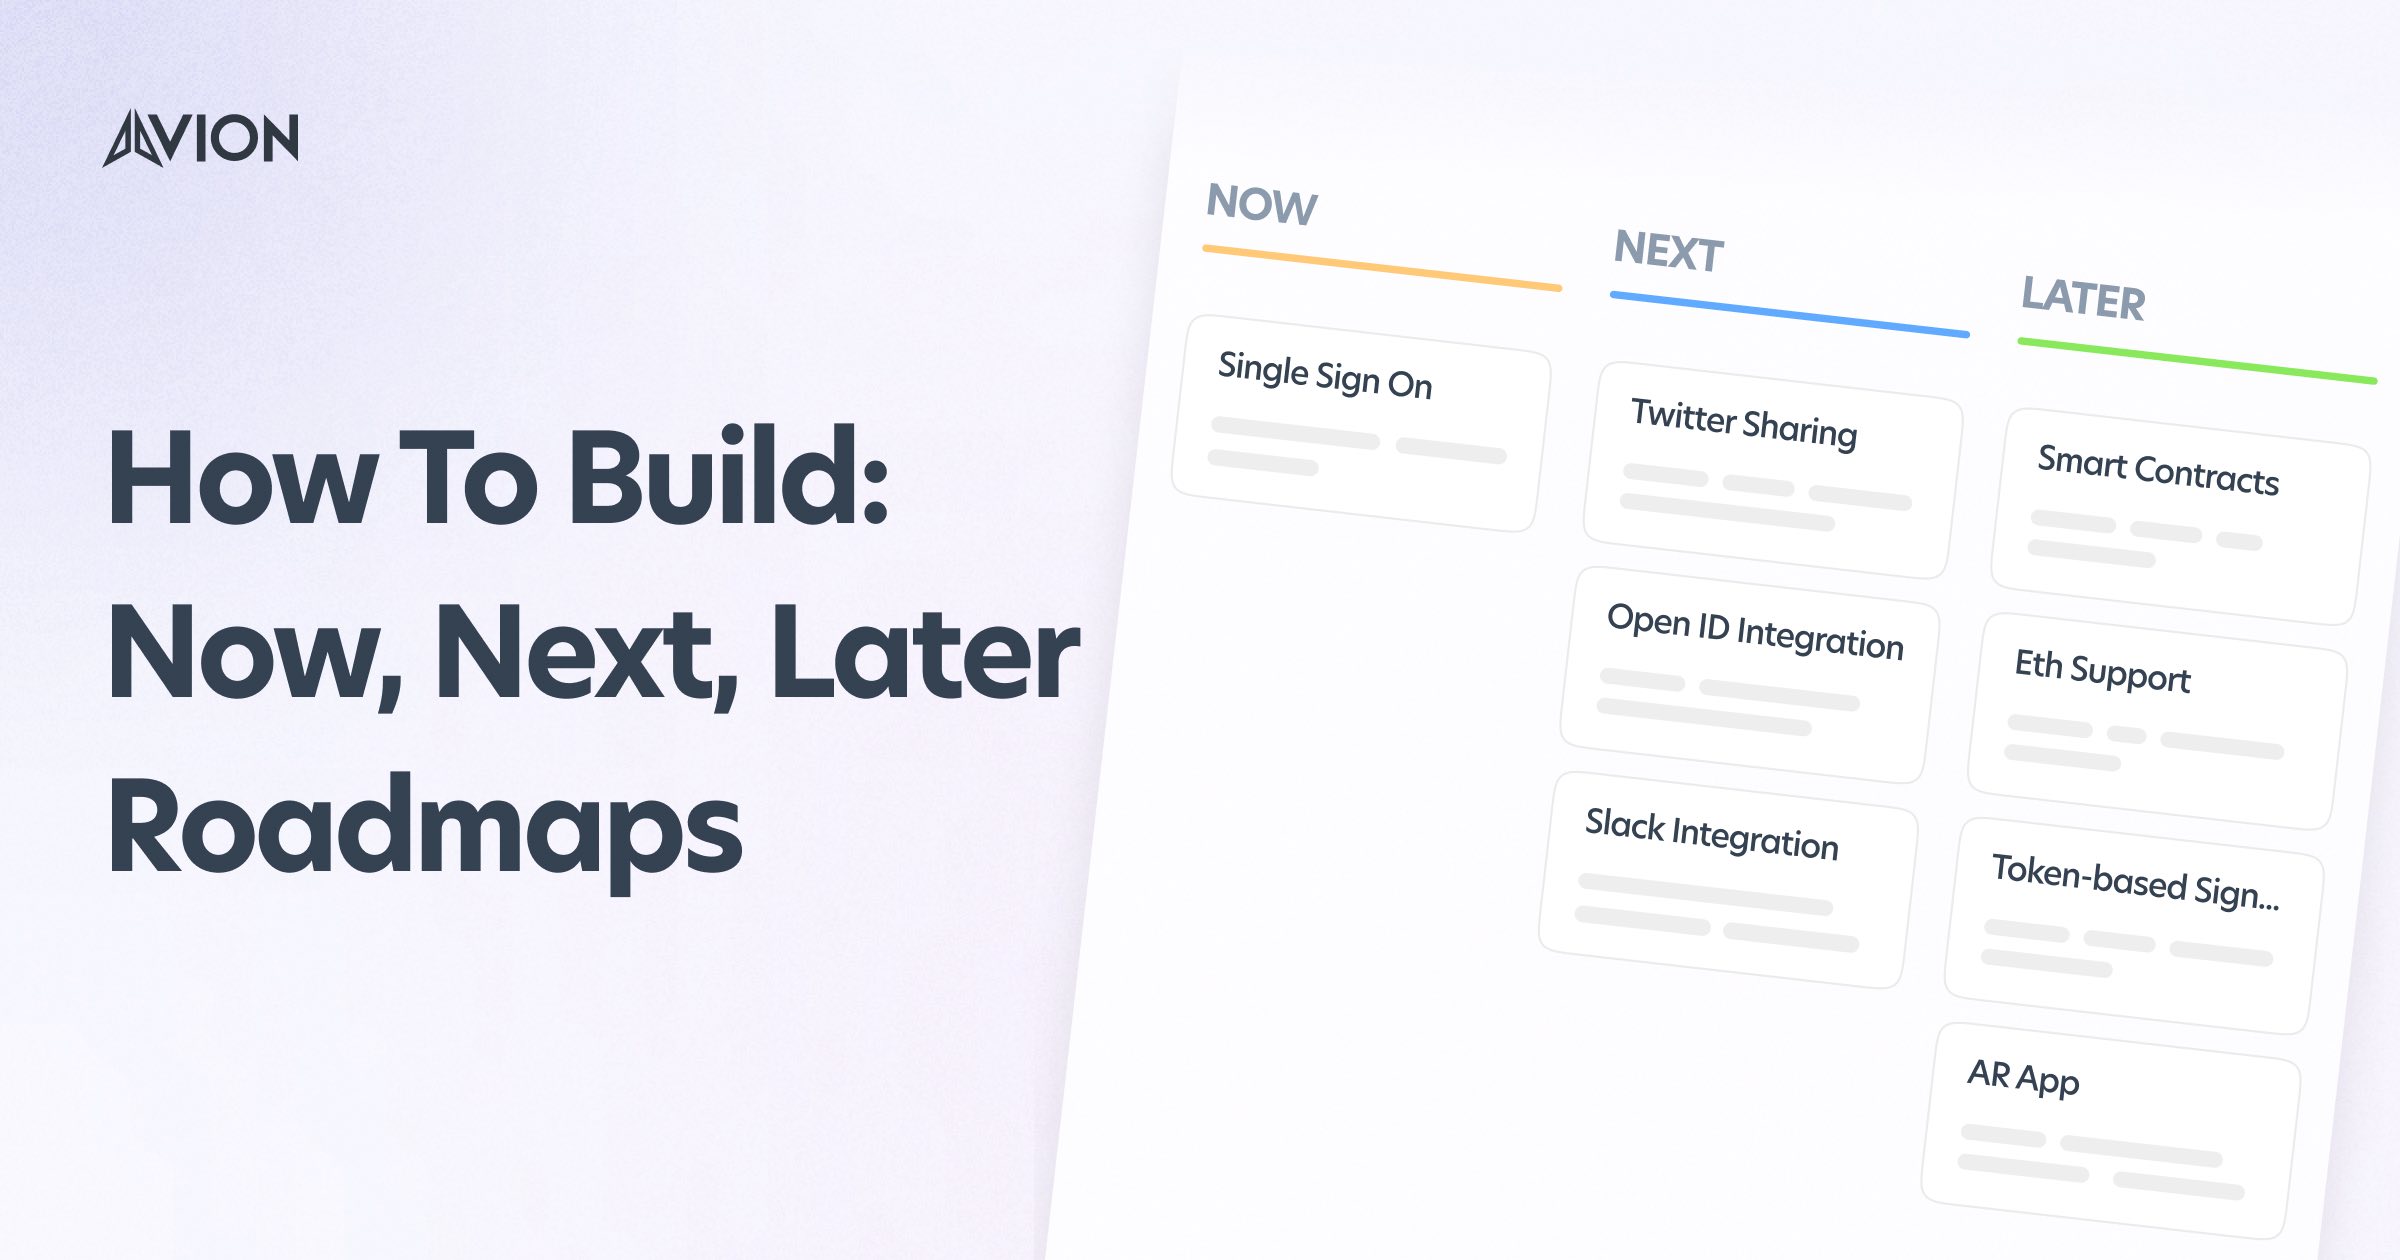 How To Build Now, Next, Later Roadmaps – Includes examples and definitions